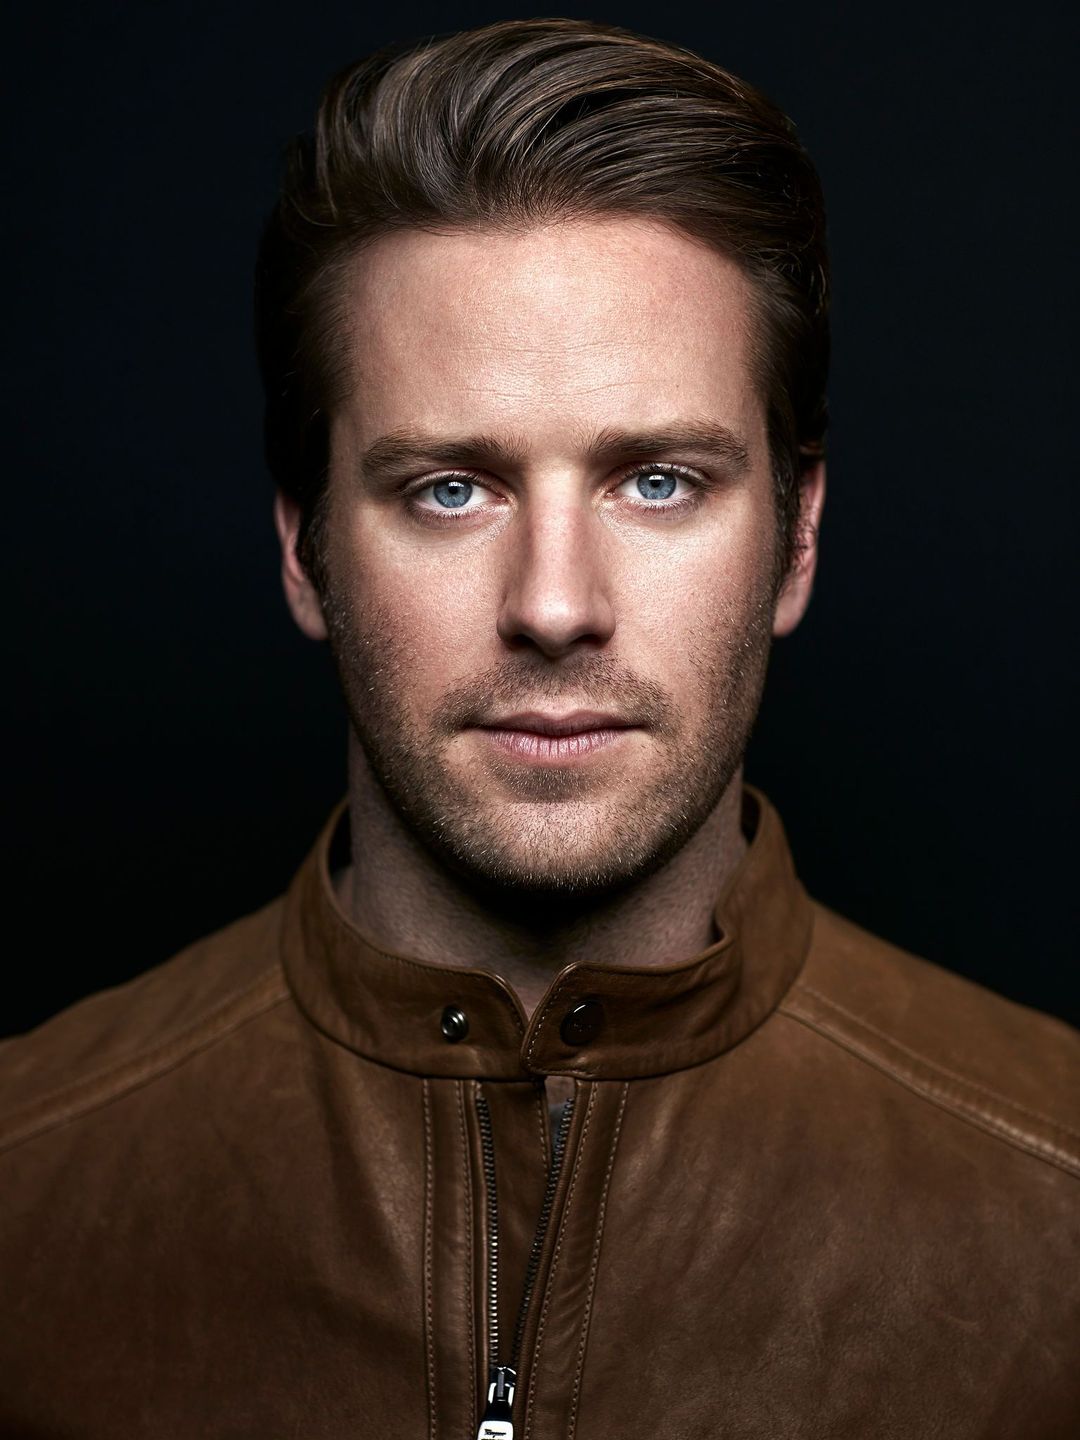 Armie Hammer who is his mother